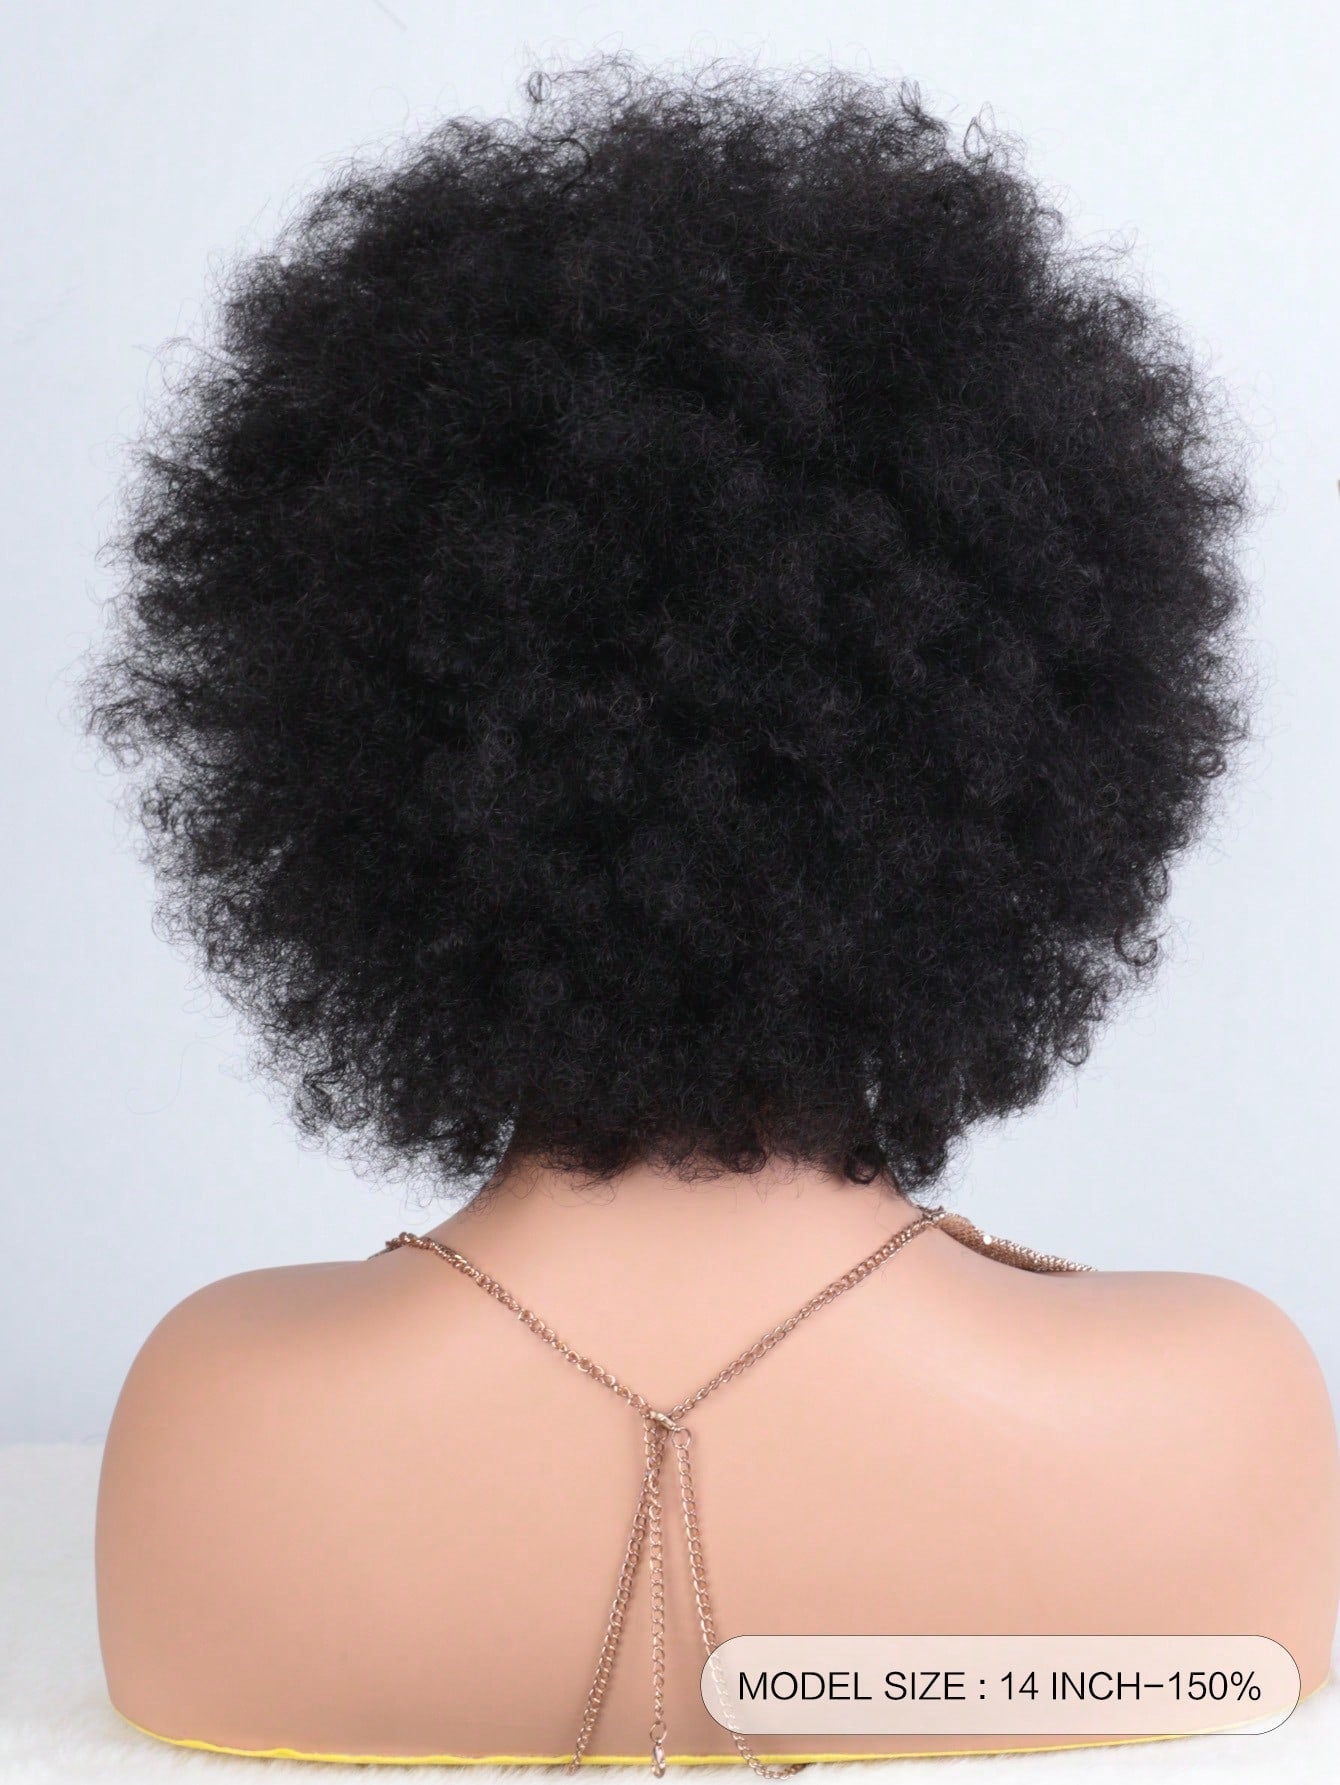 Short Hair Afro Kinky Curly Wigs With Bangs Human Hair Puffs Ready To Wear Afro Curl Wig